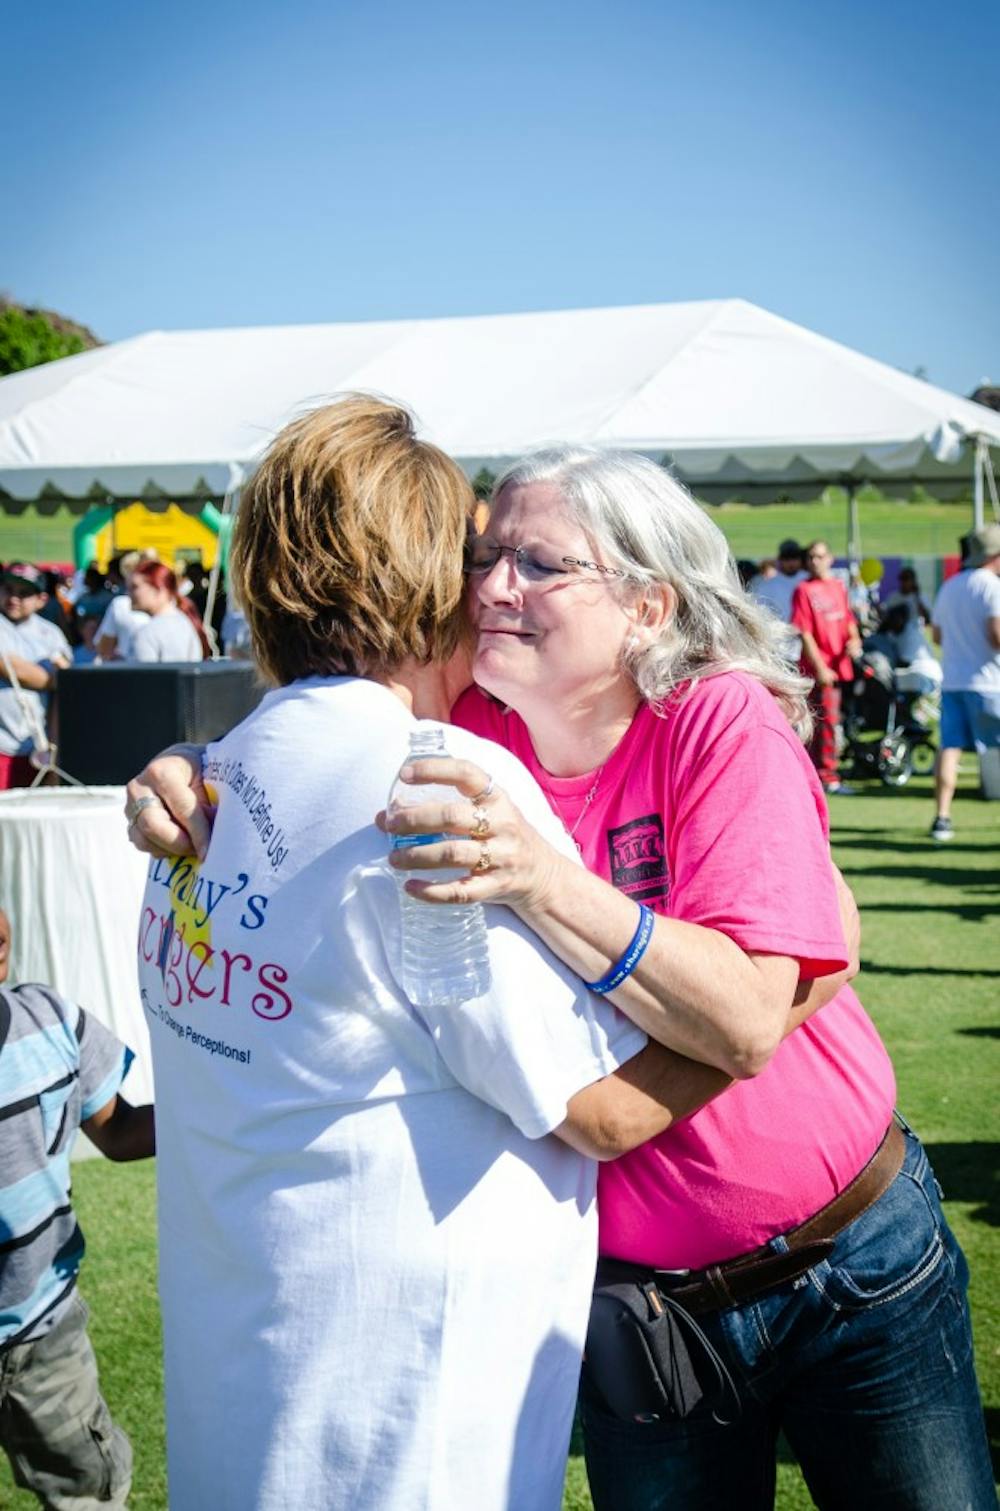 Gina Johnson, the founder of Sharing Down Syndrome Arizona, takes a moment to hug a supporter at the 14th Annual Walk for Down Syndrome. (Photo by Andrew Ybanez)